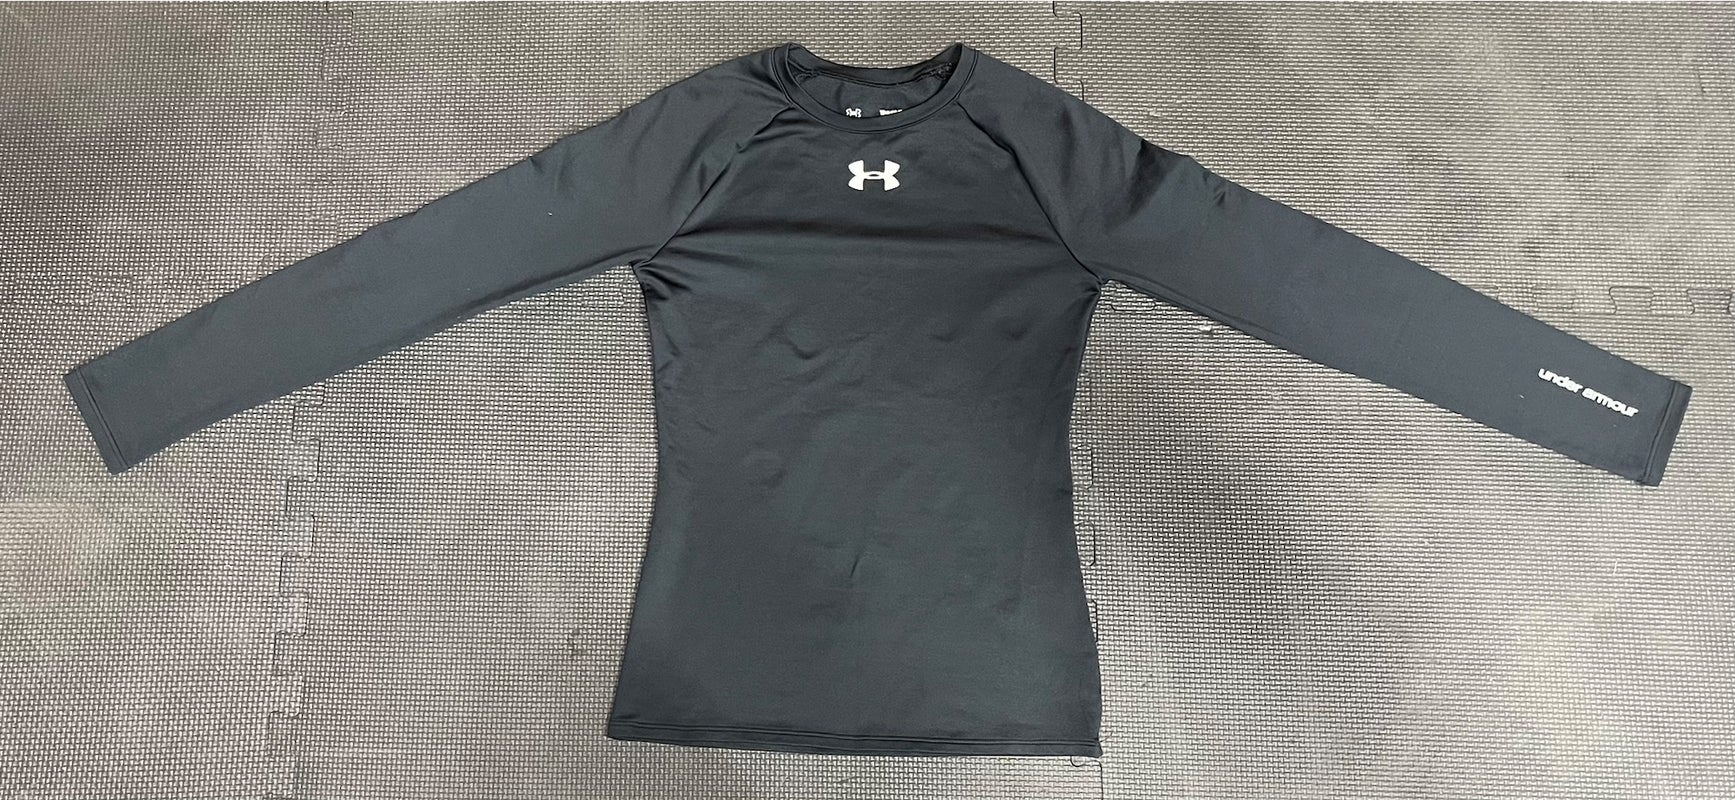 Used Compression Under Armour Baseball Sleeves- Youth Large. Good Condition!!!